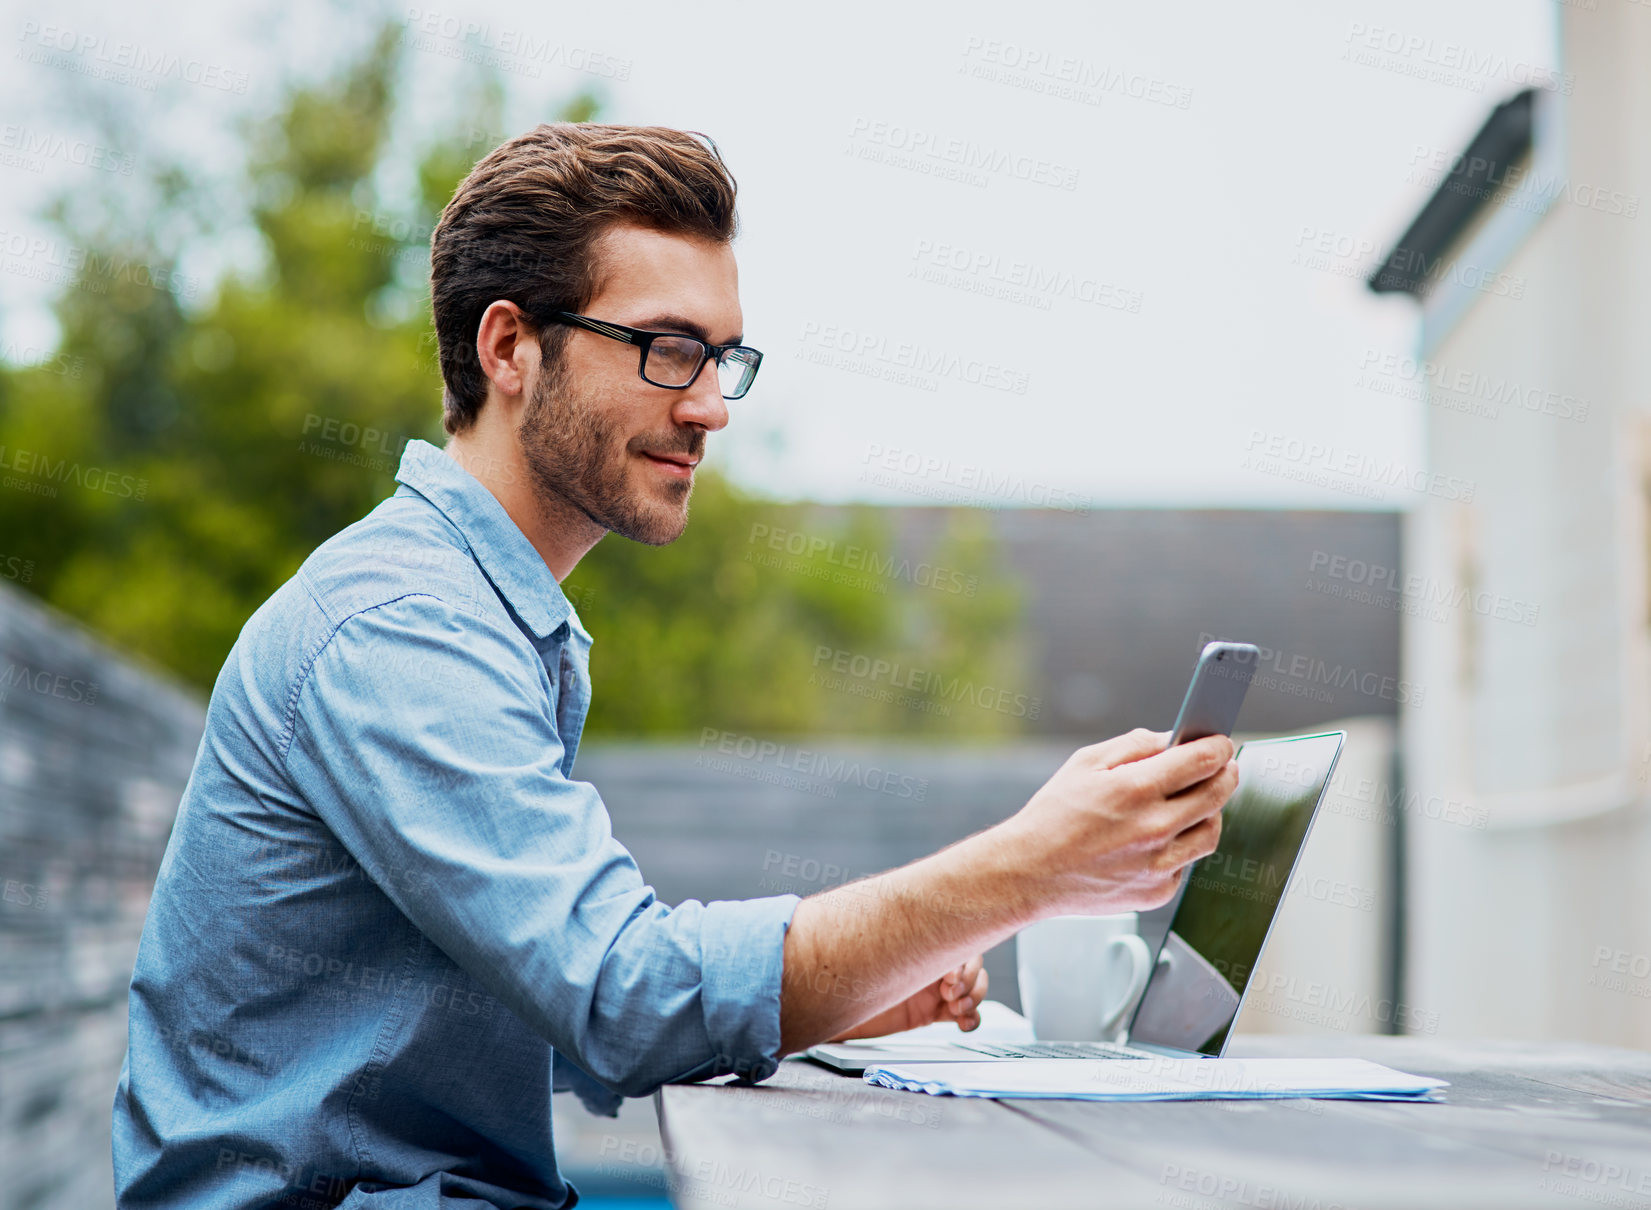 Buy stock photo Shot of a handsome young man using a laptop and cellphone outdoors